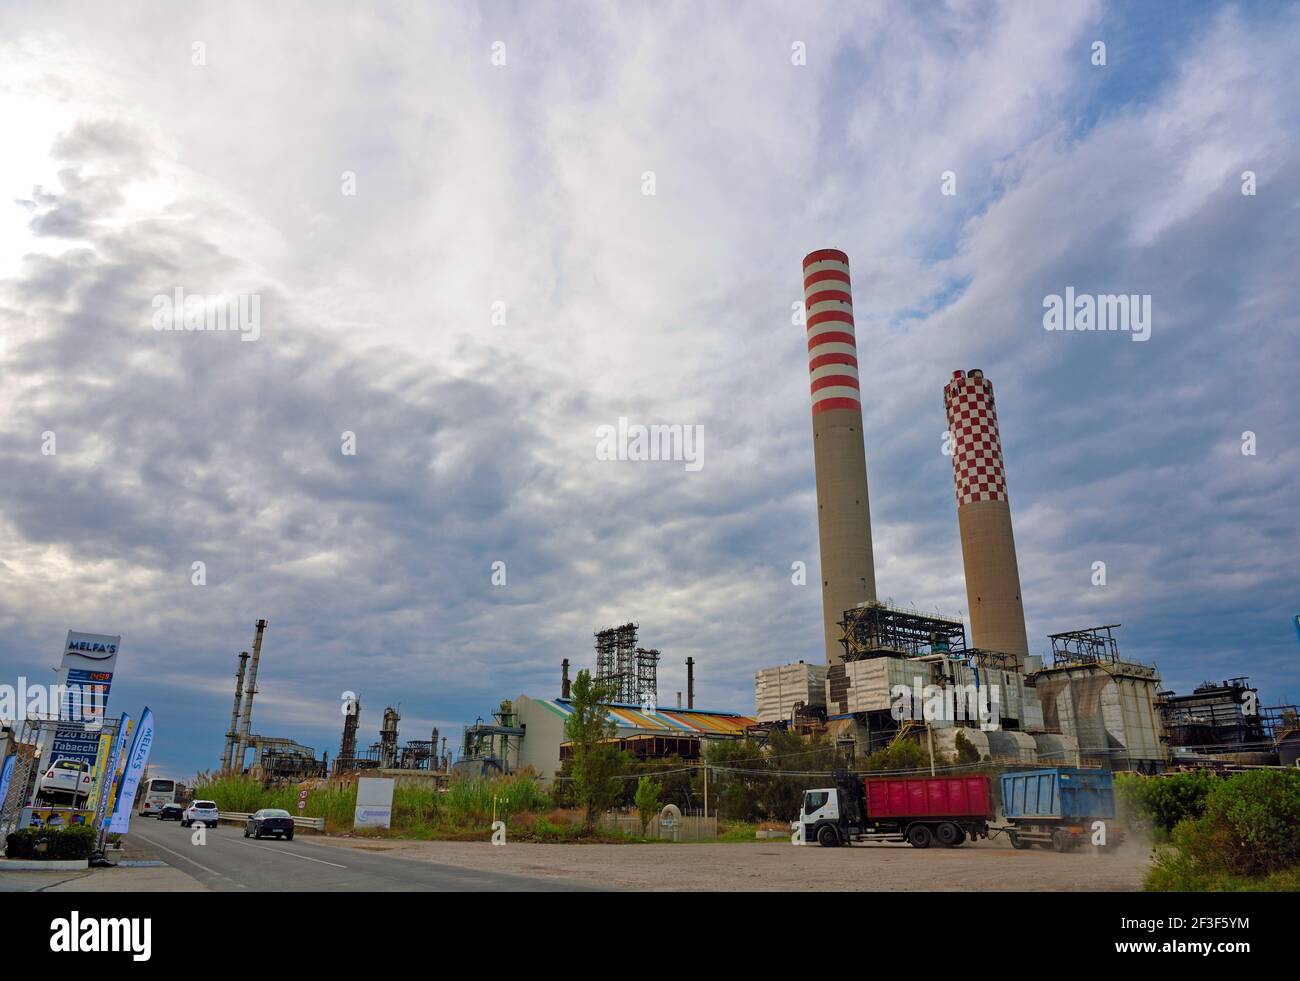 industrial area petrochemical chimneys seen from the highway Gela Italy Stock Photo